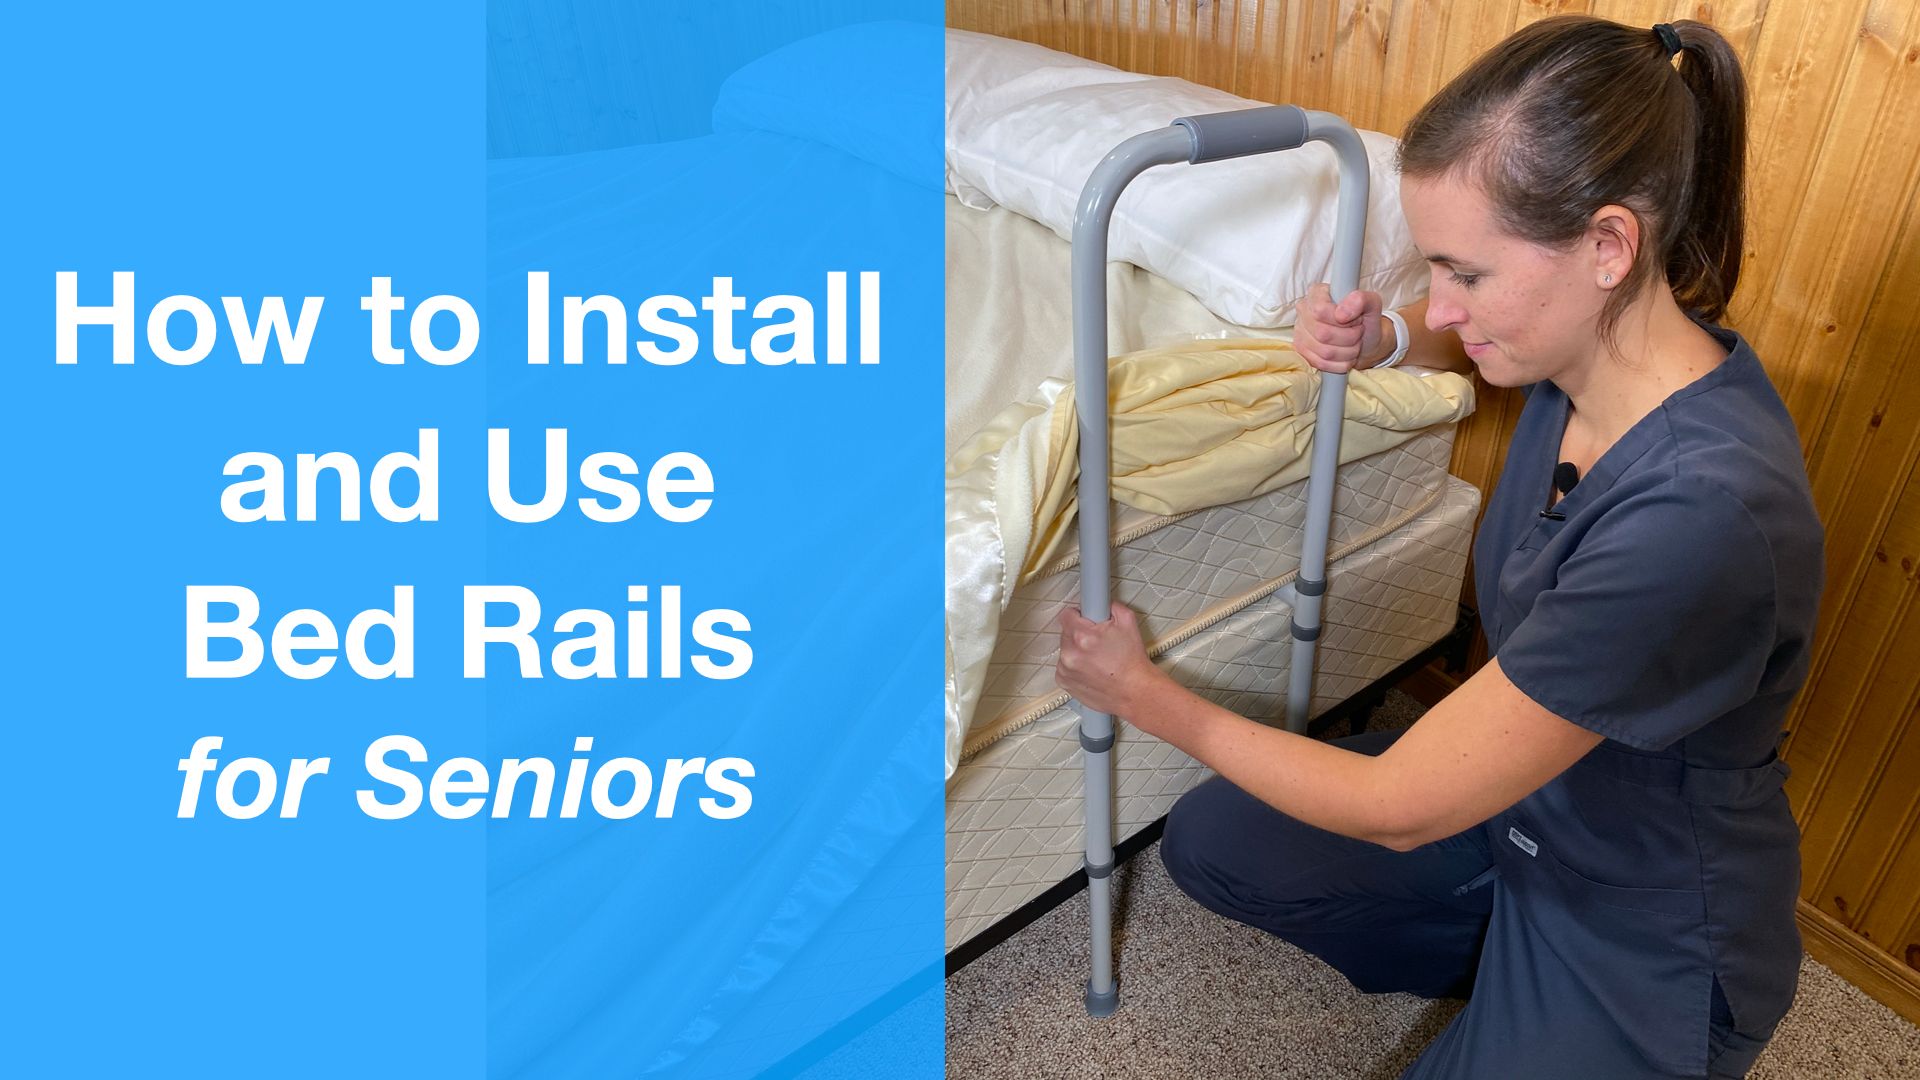 https://www.equipmeot.com/contents/uploads/2020/11/how-to-install-bed-rails-for-seniors.jpeg